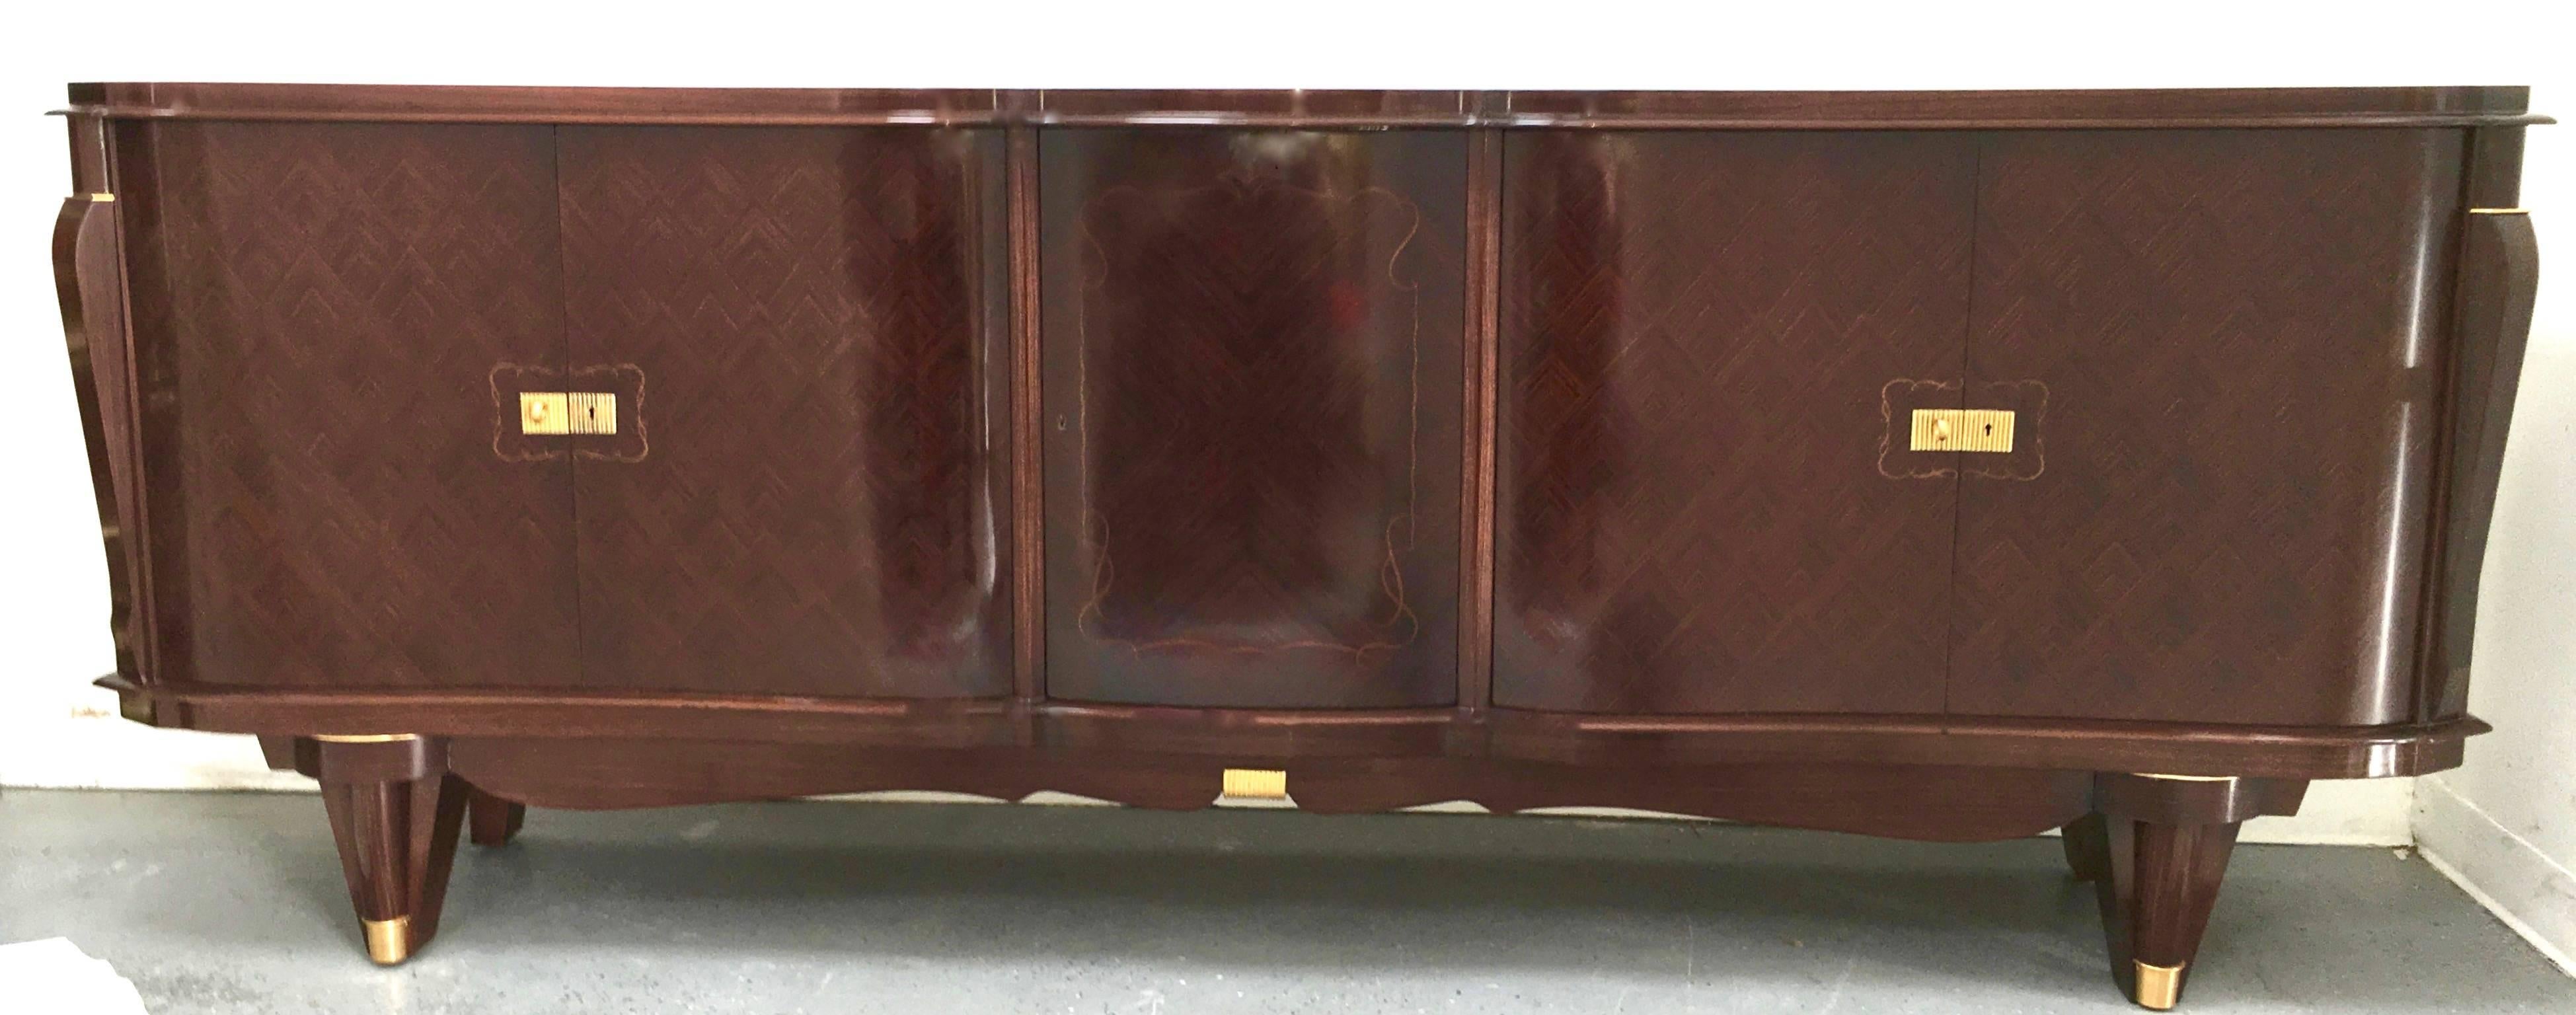 Stunning French Five-Door Deco Buffet Curved Macassar Ebony and Bronze Details 5